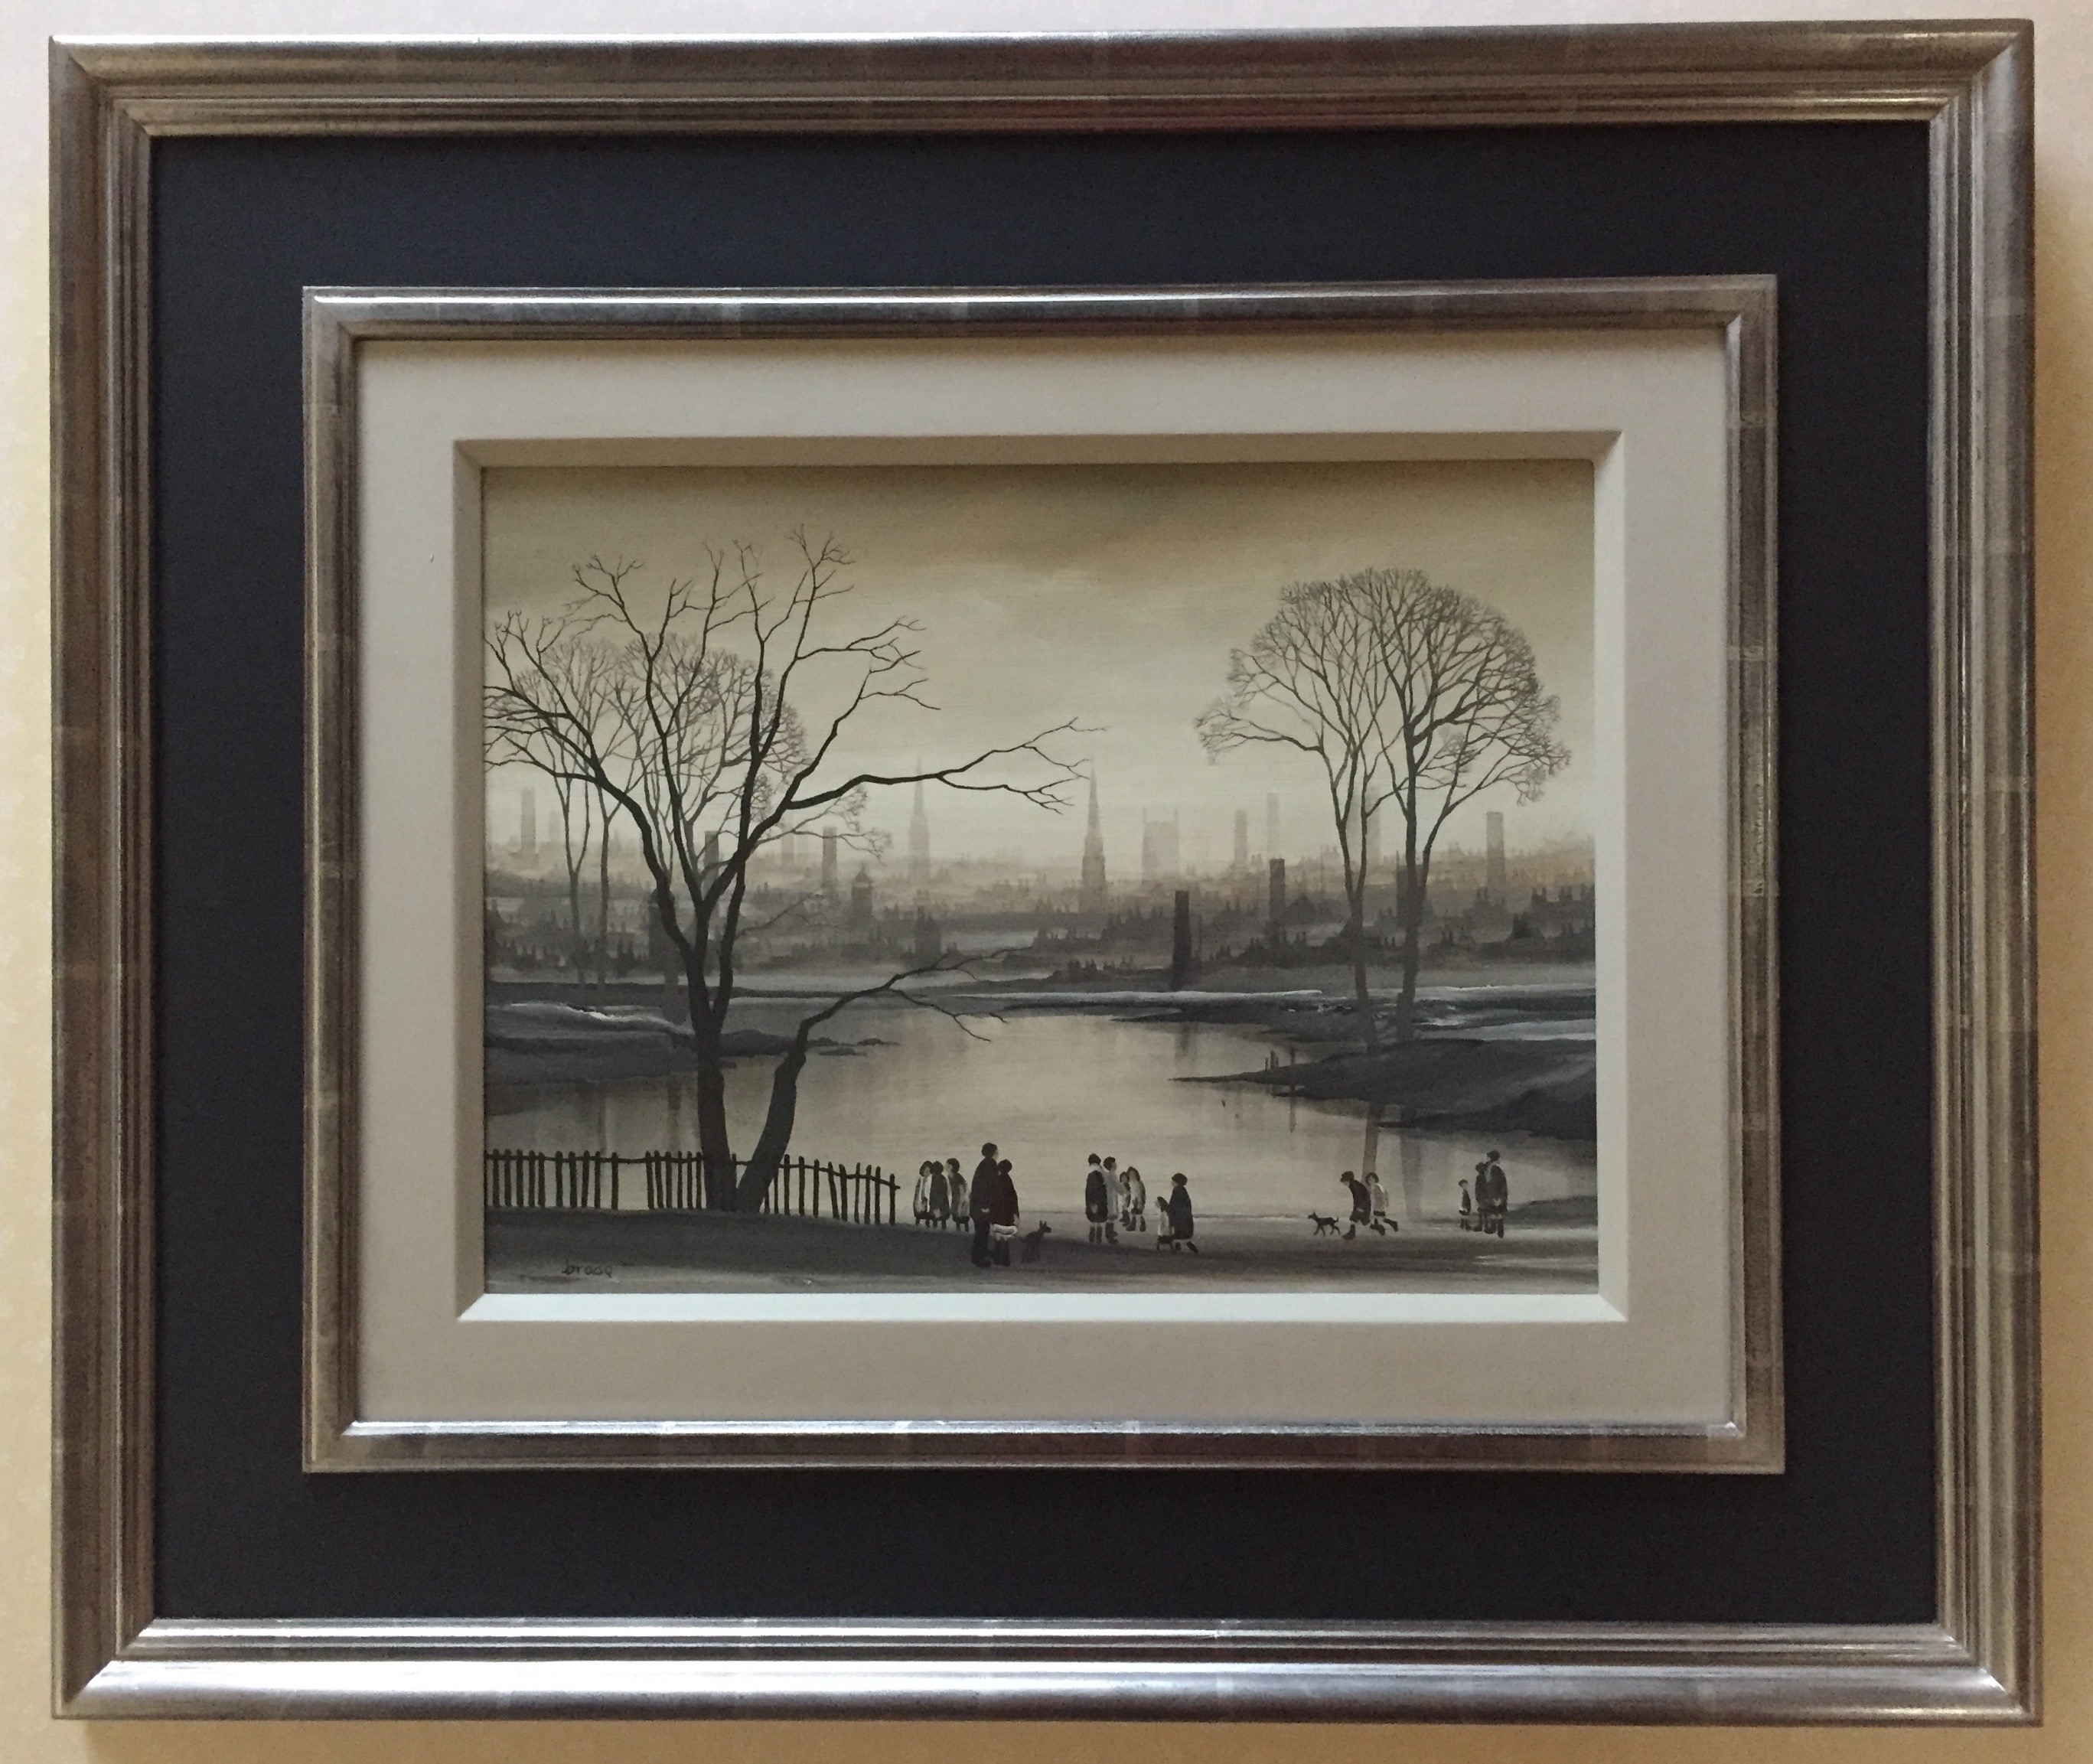 Image for Northern City Scape Lake Scene in Winter ORIGINAL BRAAQ PAINTING